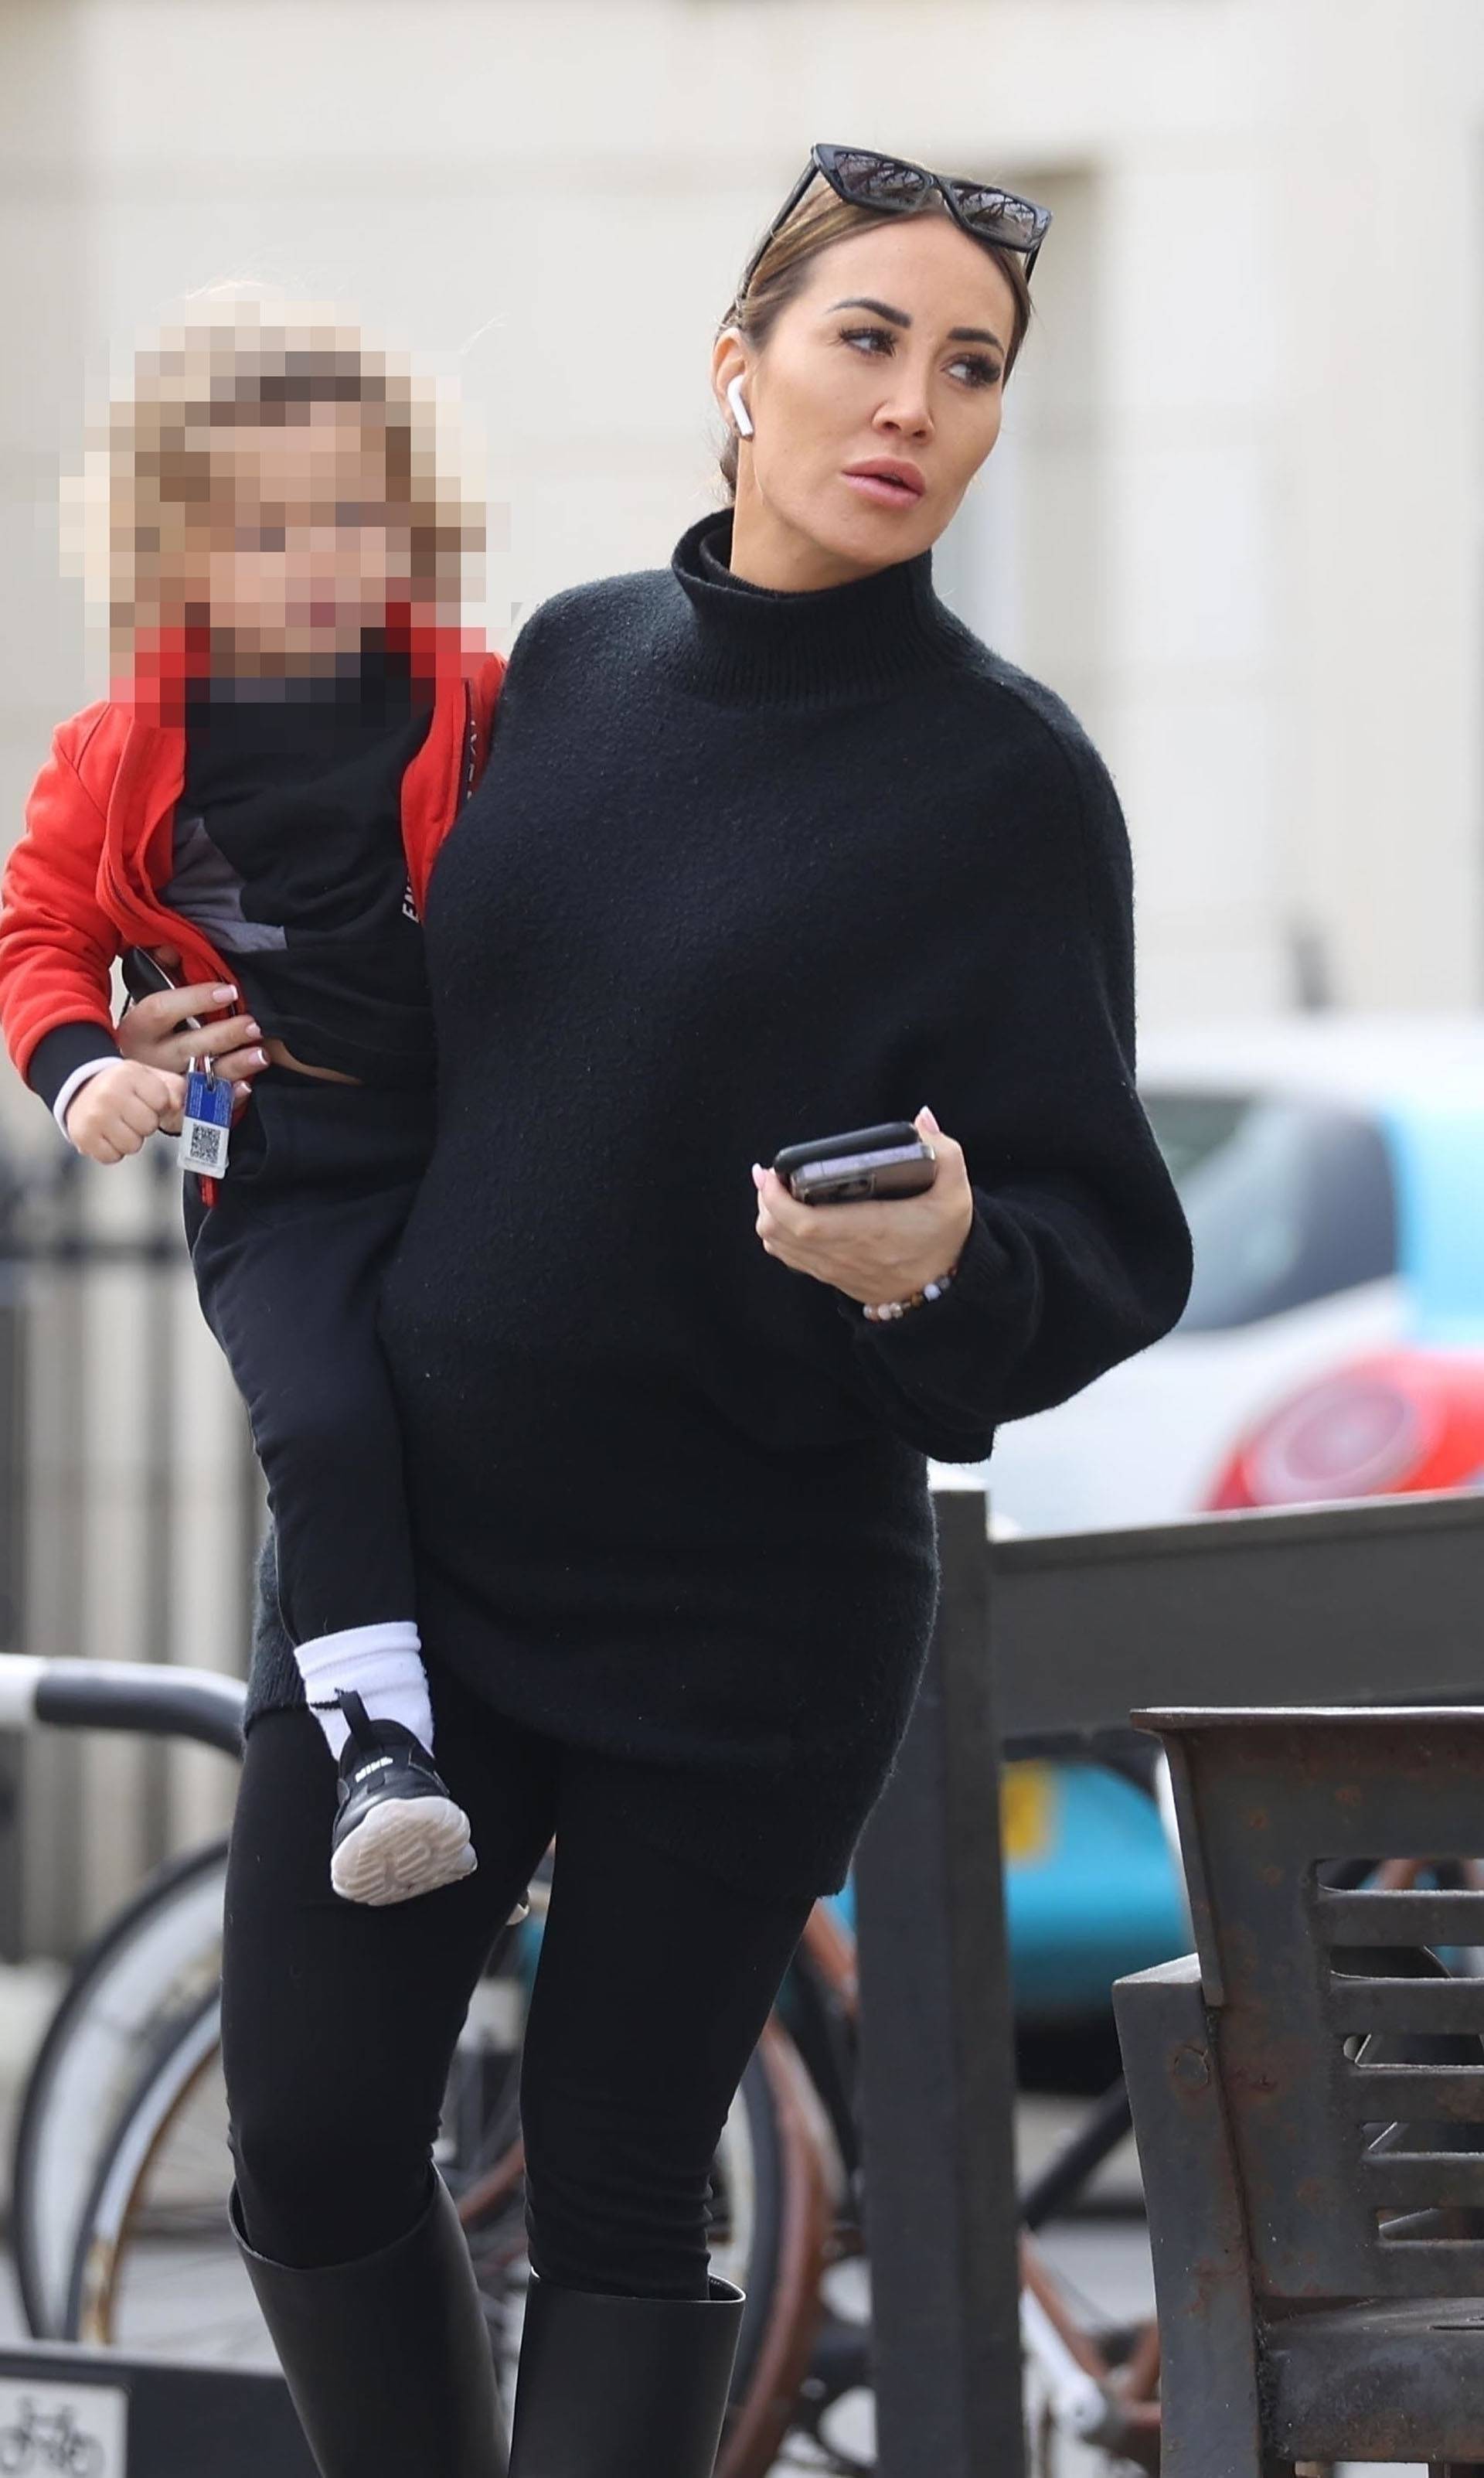 *EXCLUSIVE* Kyle Walker's pregnant ex Lauryn Goodman is seen out in Hove with her young son Kairo Walker, who she shares with Manchester City & England football star.